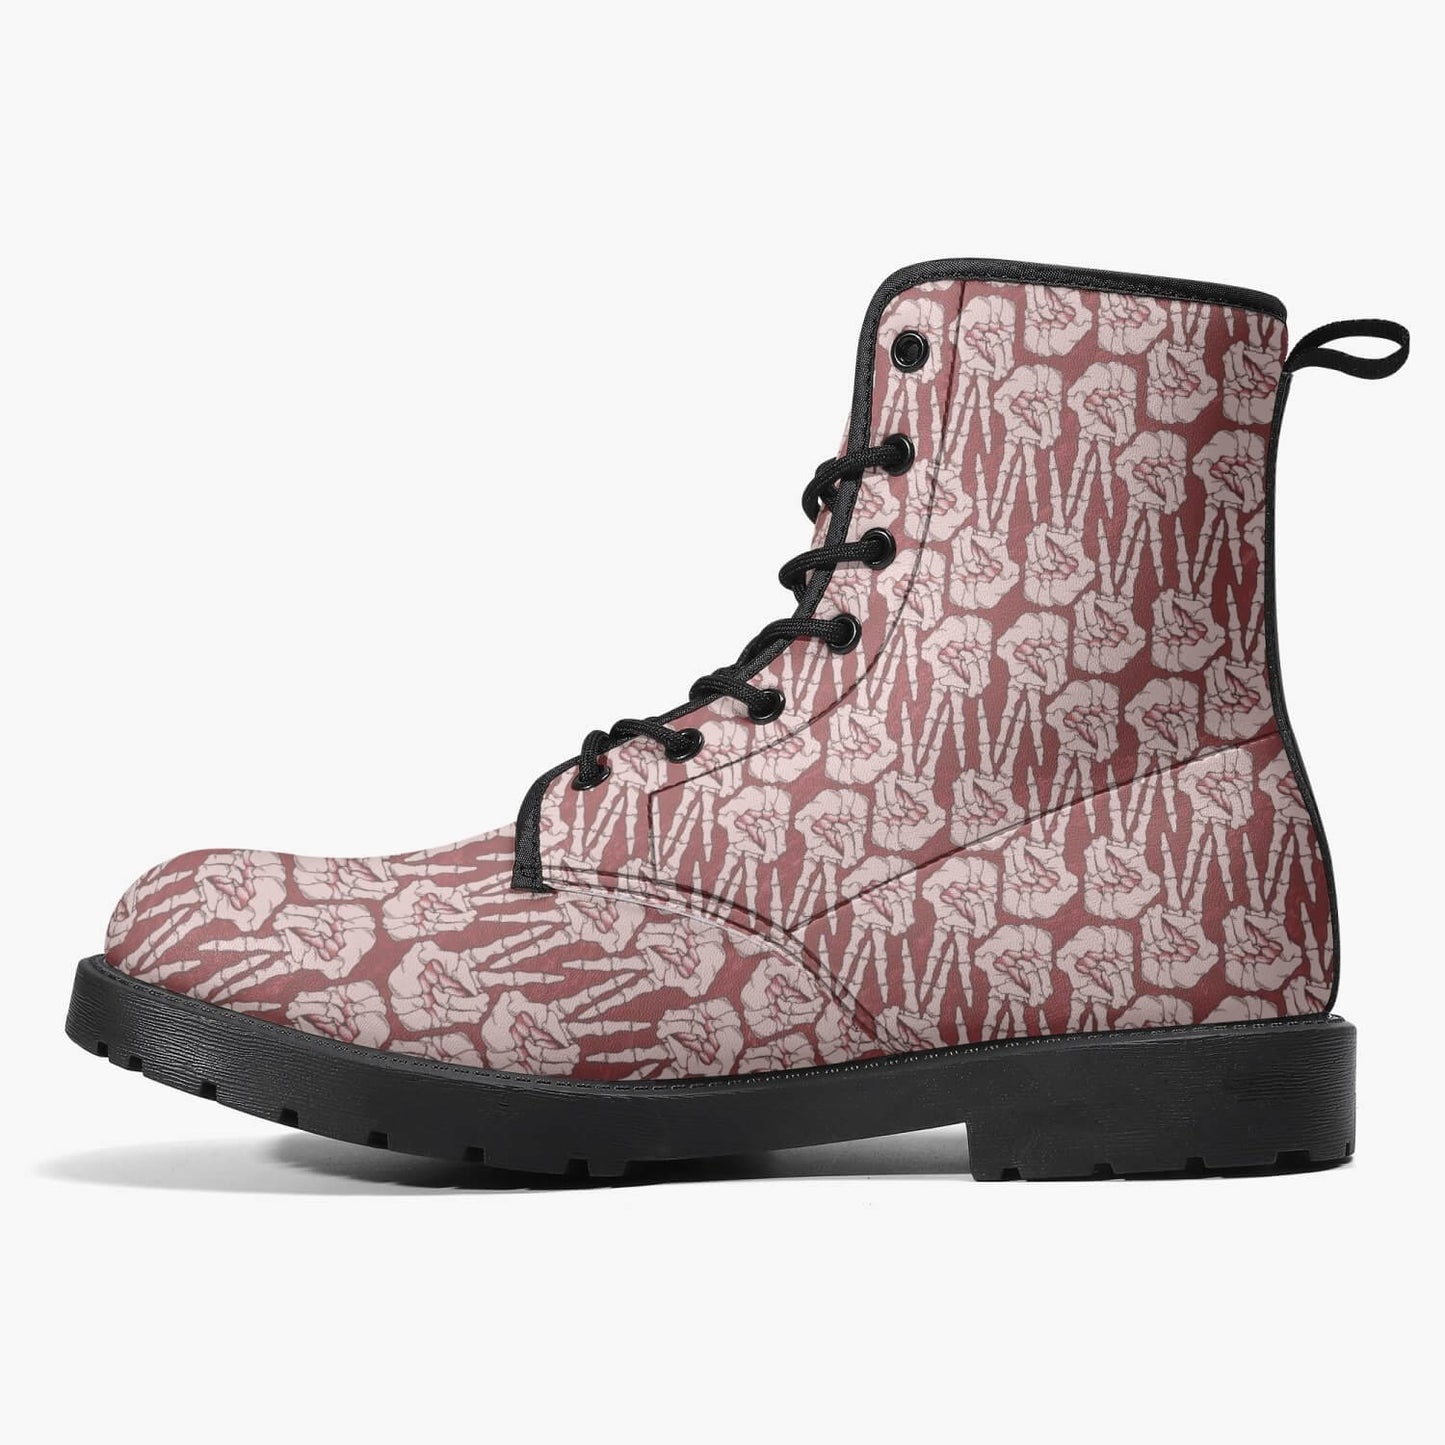 Leather Like Boots Print on any thing USA/STOD clothes